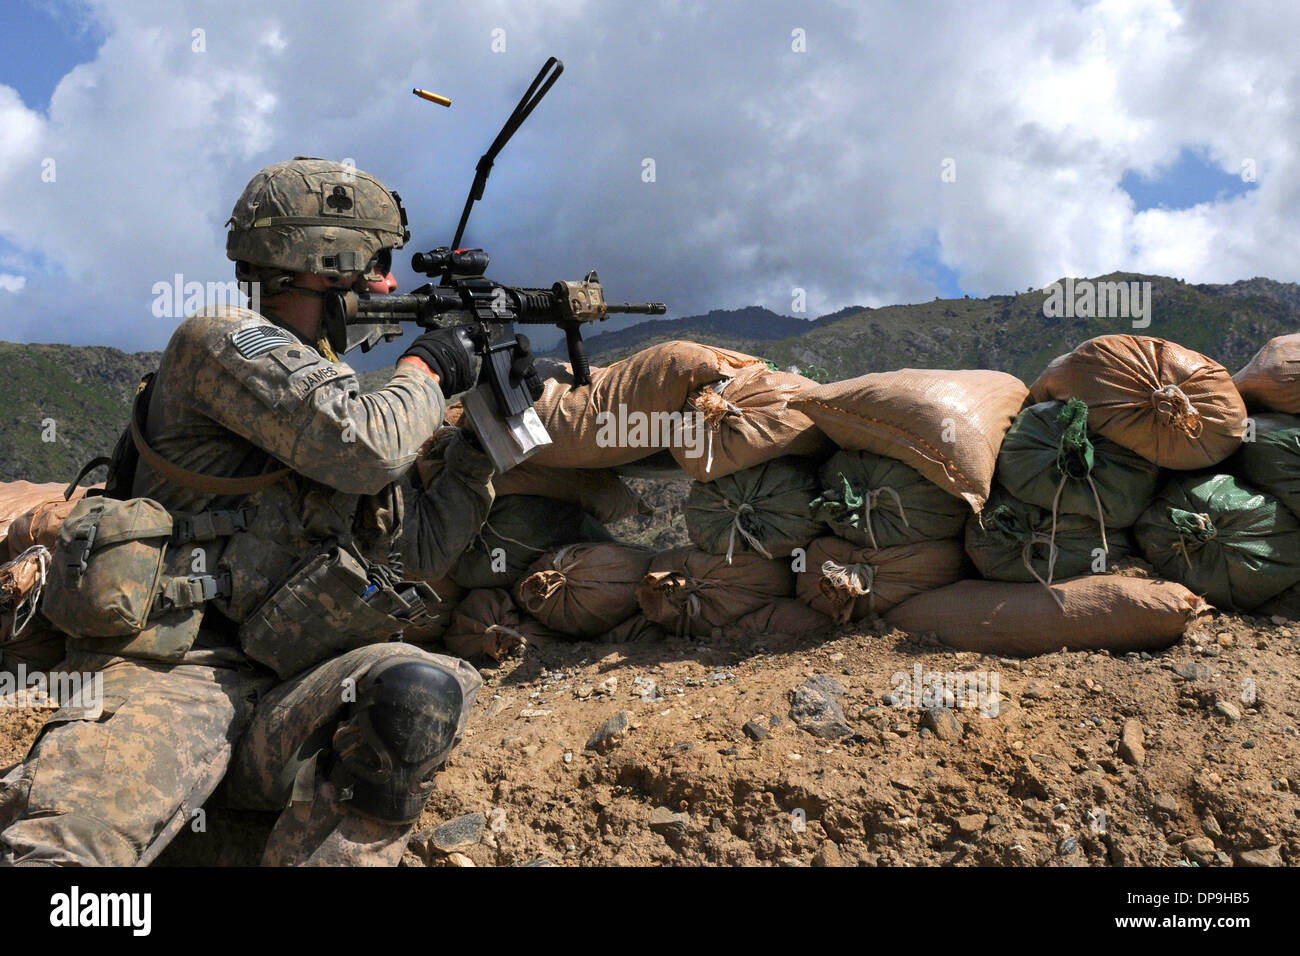 U.S. soldier shoots at the enemy during a more than three-hour firefight, Afghanistan Stock Photo